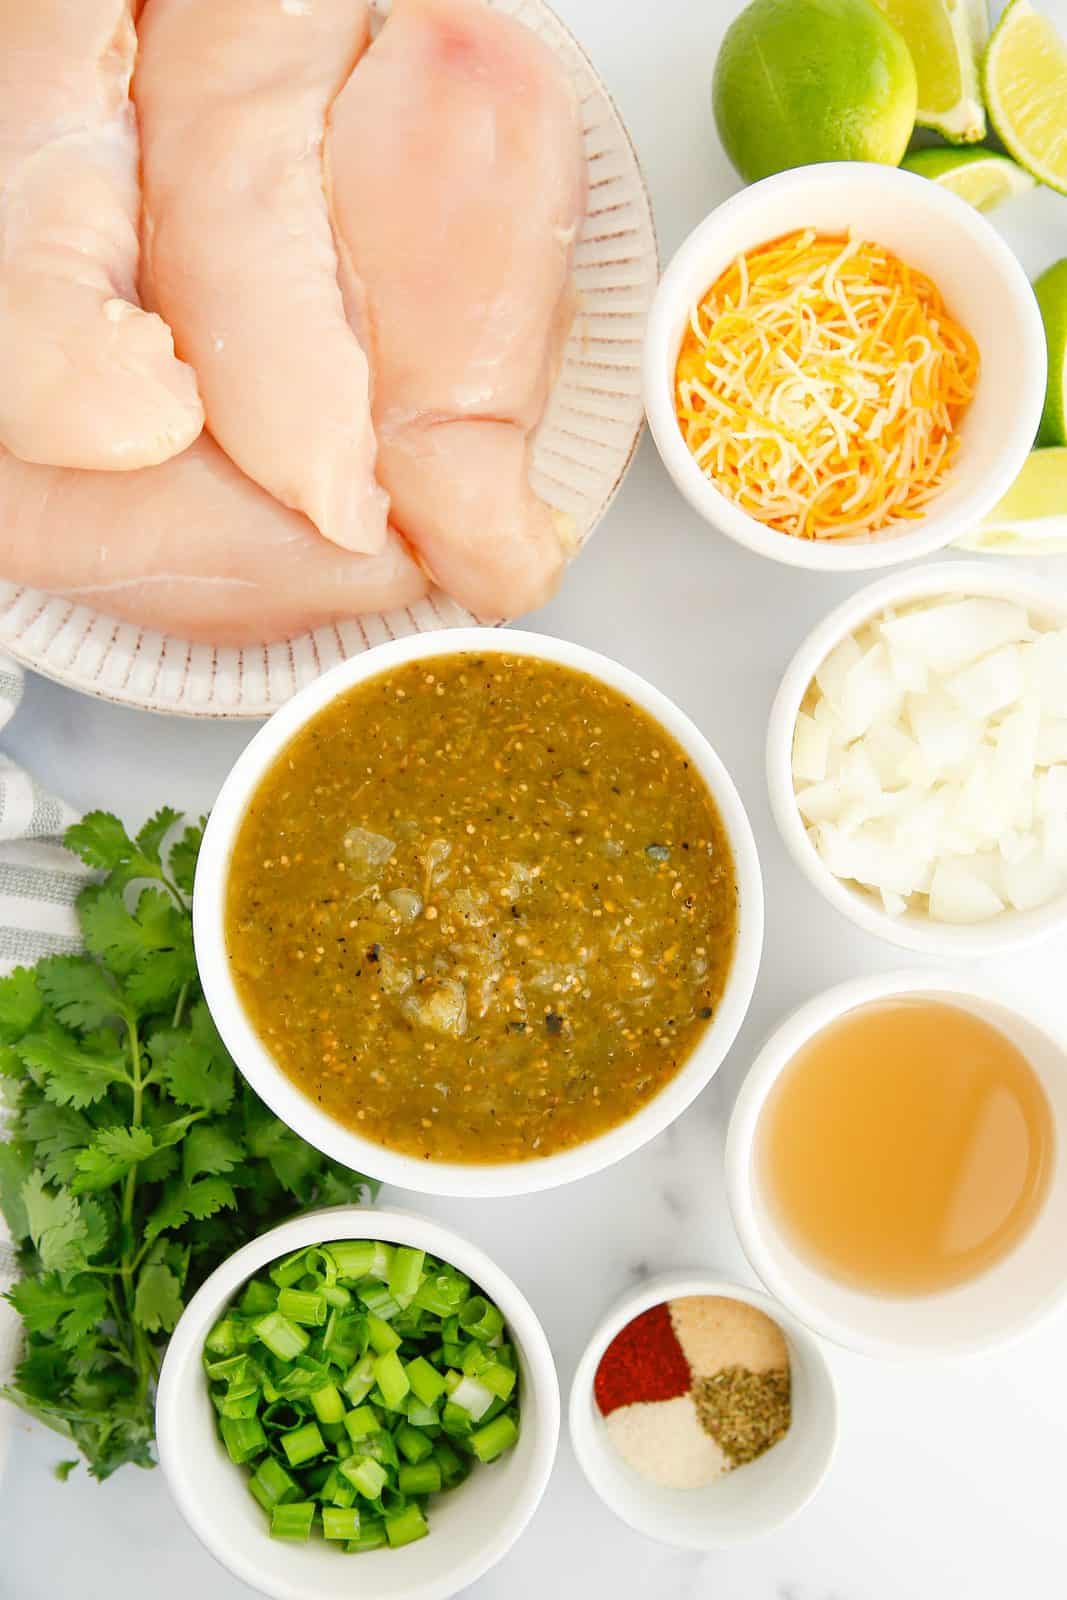 Ingredients needed: chicken breasts, olive oil, onion, green salsa verde, chicken or vegetable broth, chili powder, onion powder, garlic powder, dried oregano, black pepper, kosher salt, mexican cheese, green onions, cilantro and lime wedges.